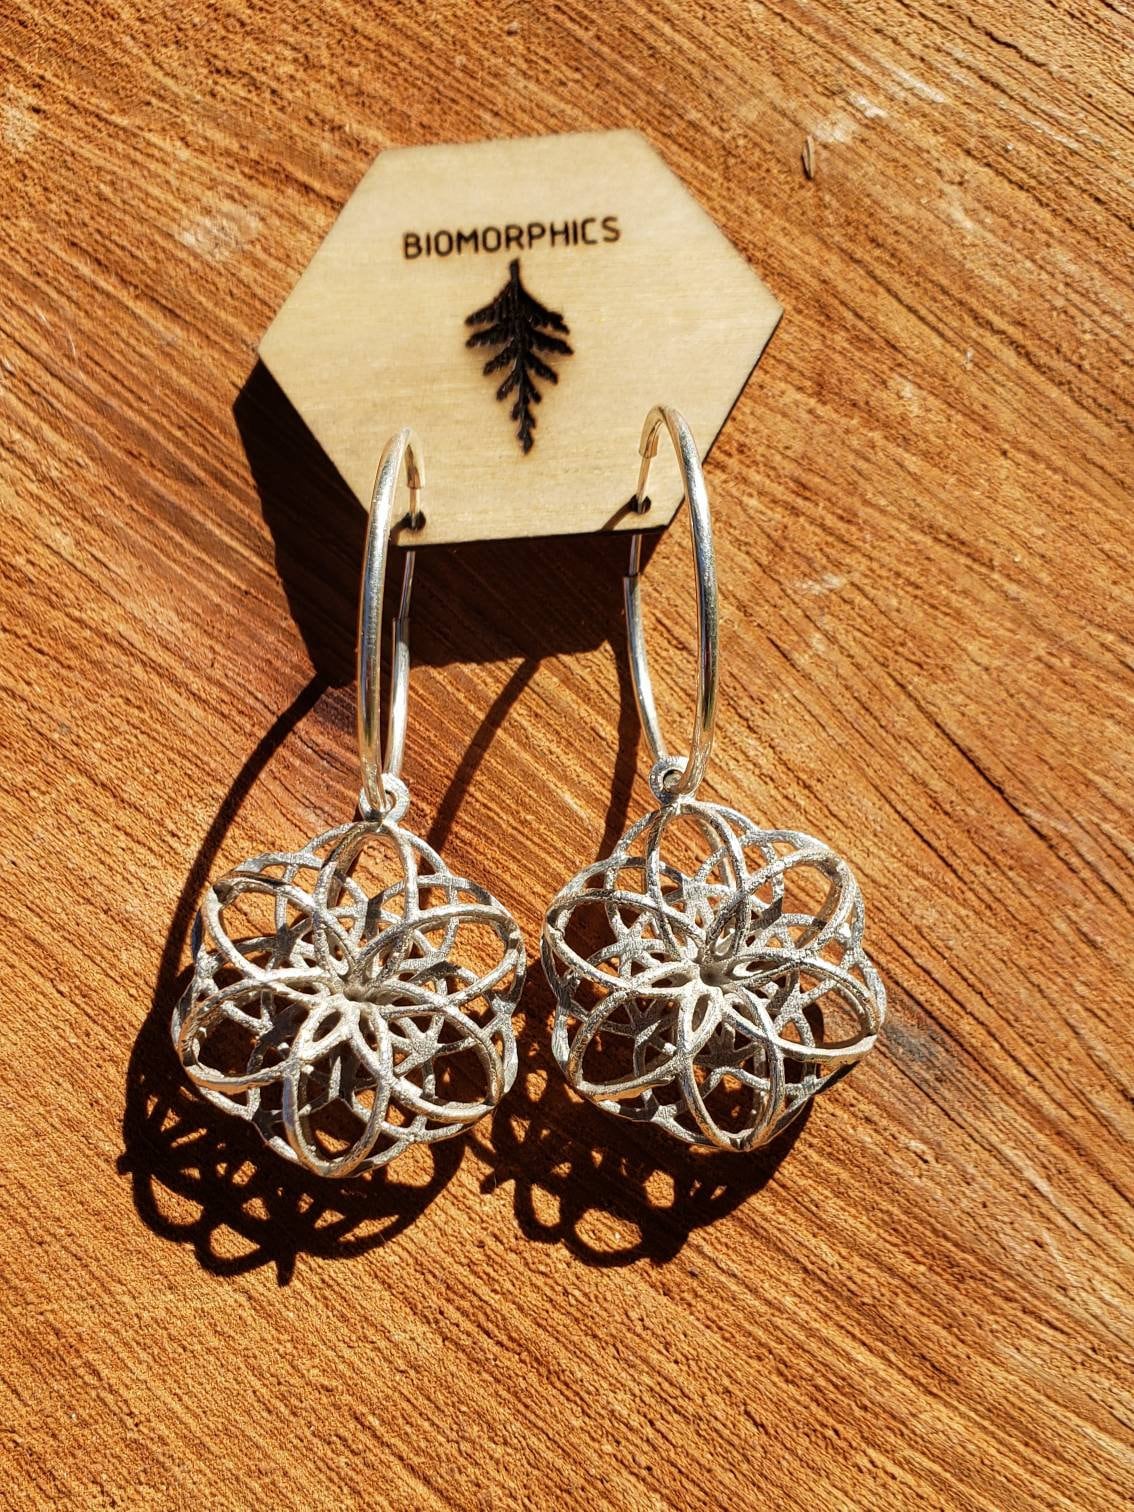 3D Seed Of Life Sacred Geometry Earrings in Recycled Sterling Silver - 3D Printed/Lost Wax Cast Jewelry